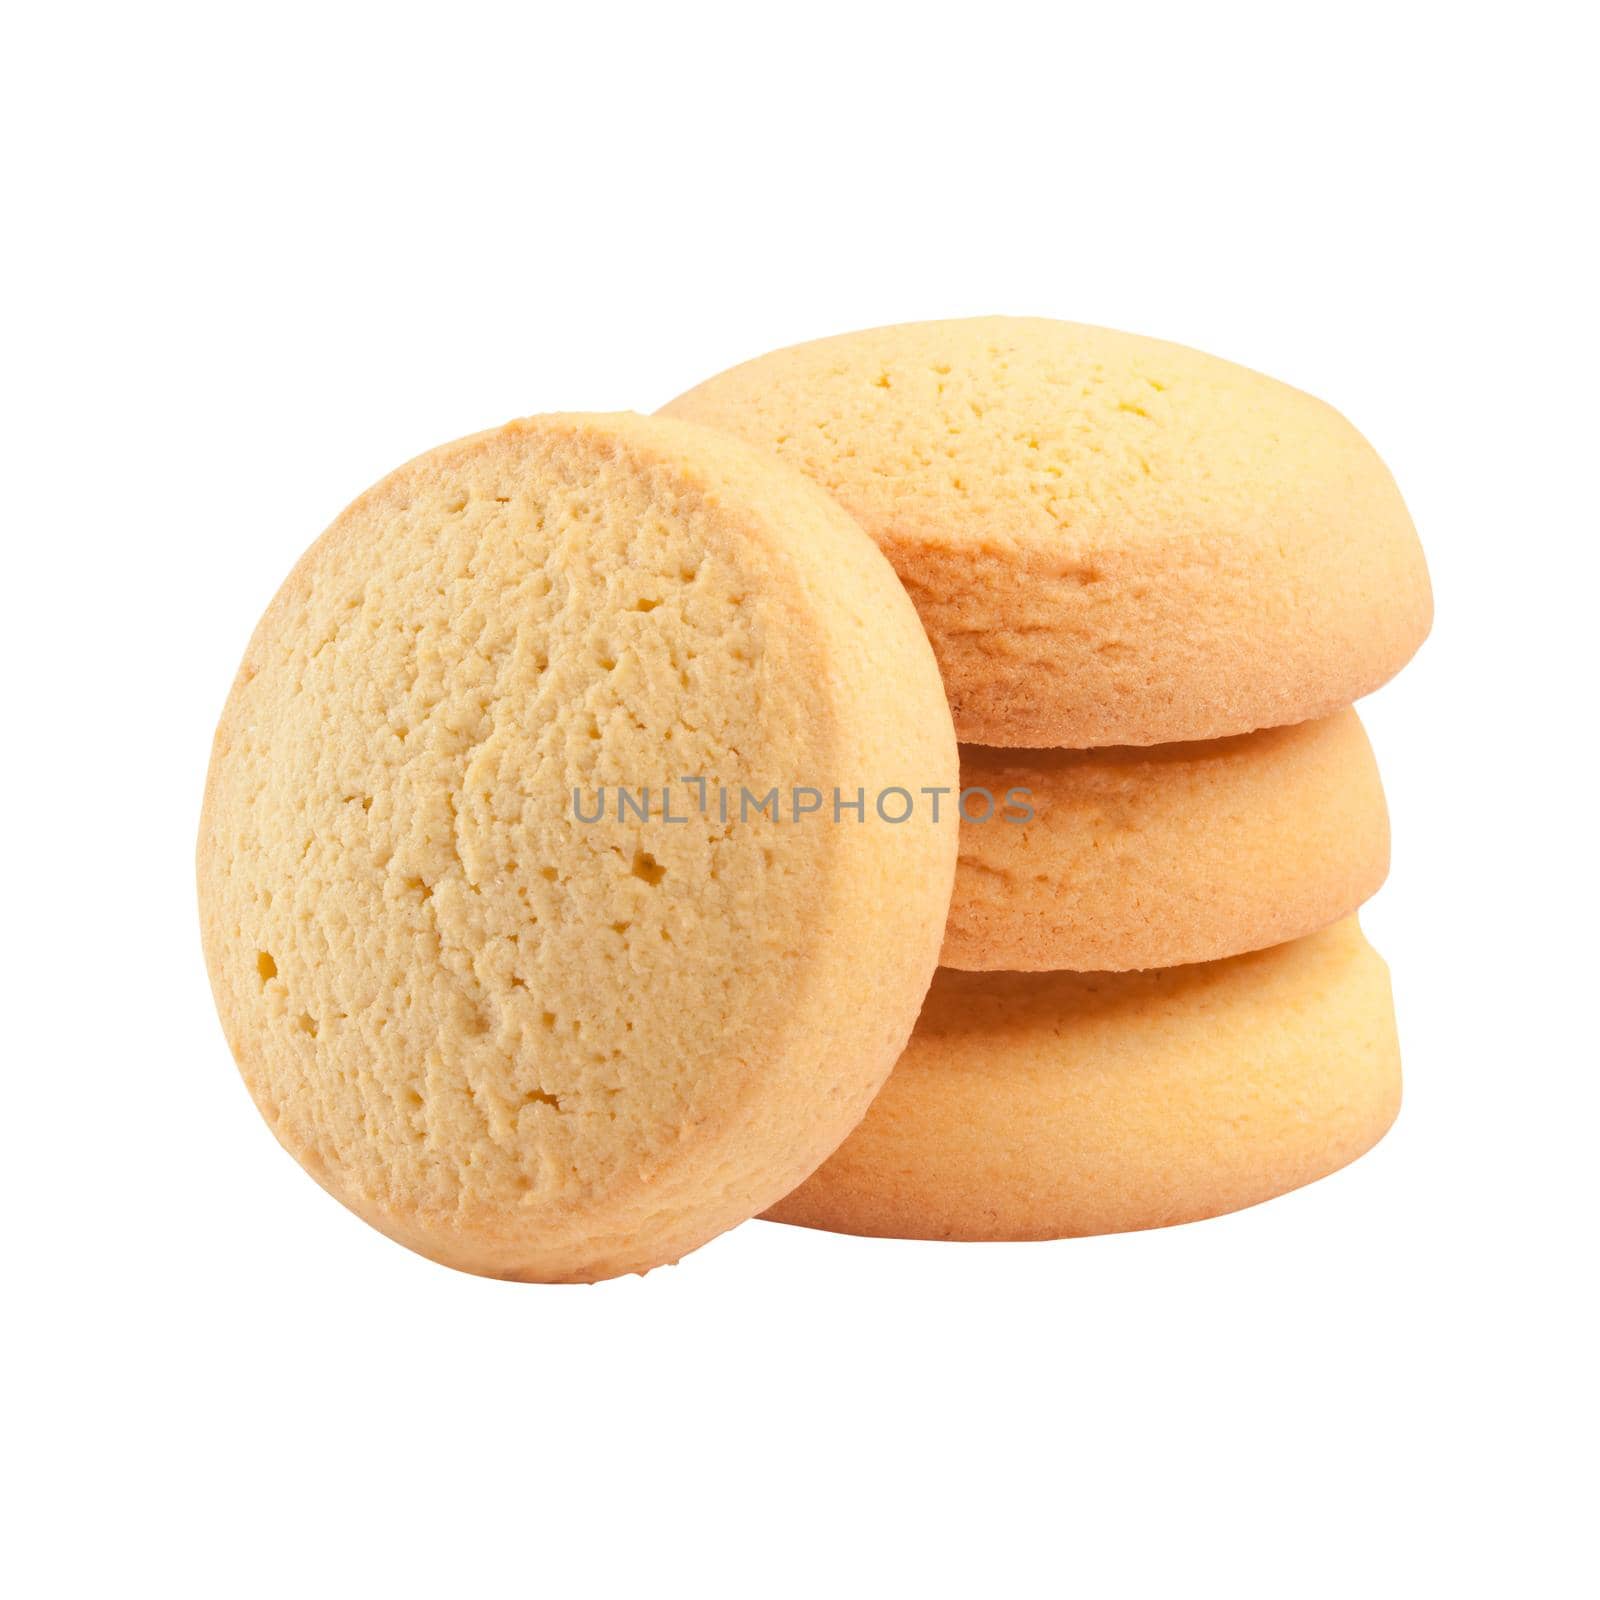 Stack of delicious crispy round butter cookies isolated on white background. Popular sweet pastries